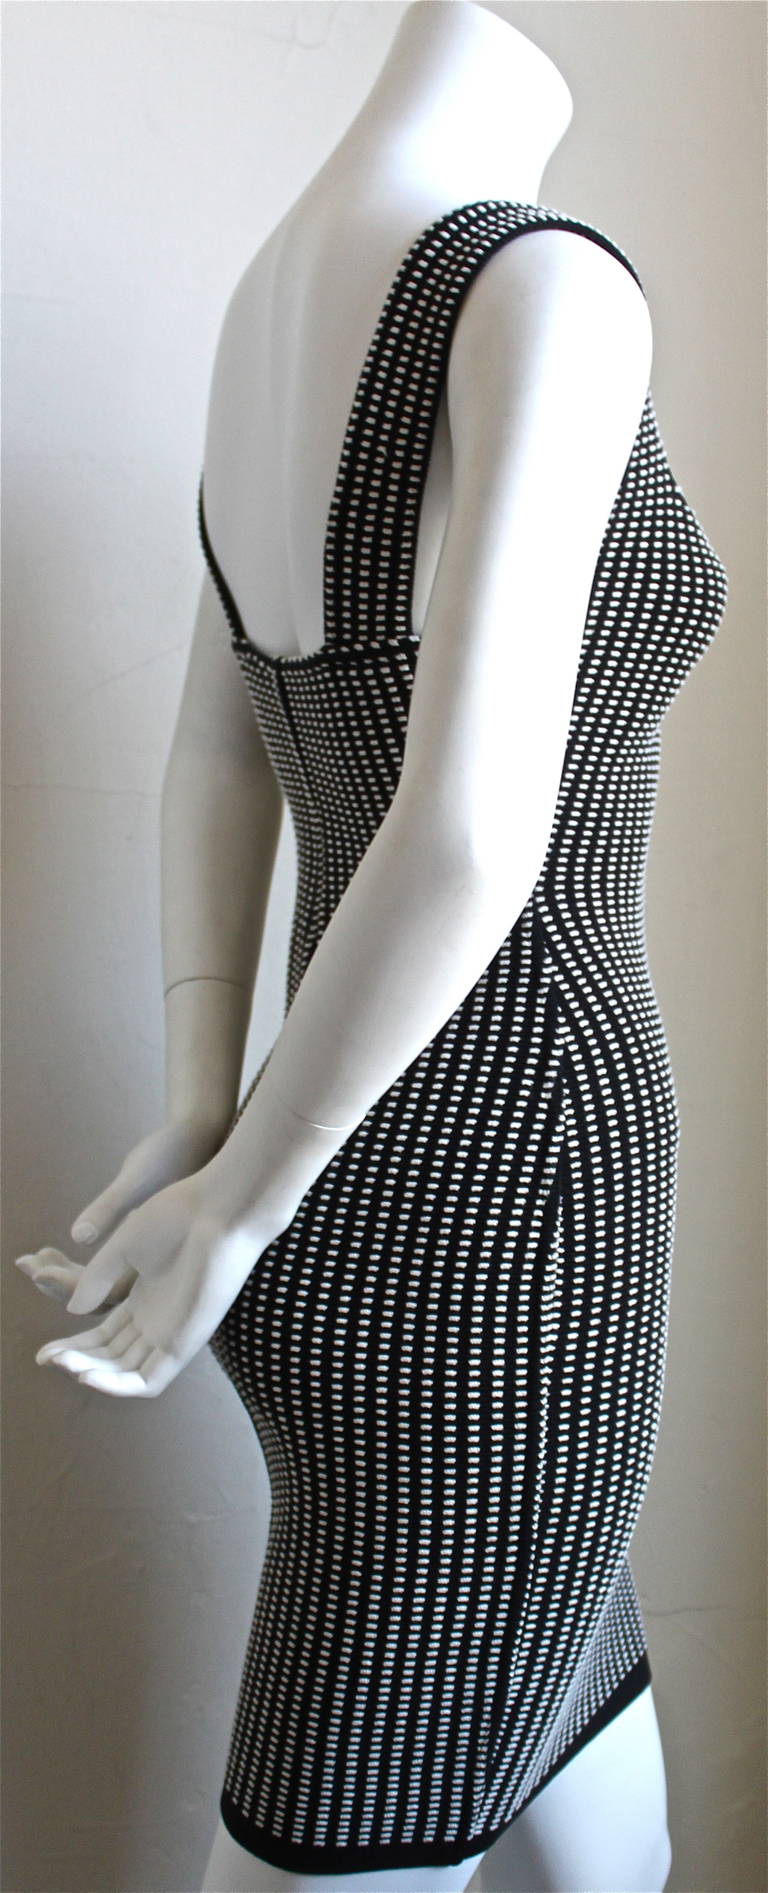 Very rare black and white textured mini dress from Azzedine alaia dating to the 1990's. Labeled a size 'm' however this dress fits a small. Approximate measurements are: bust 30